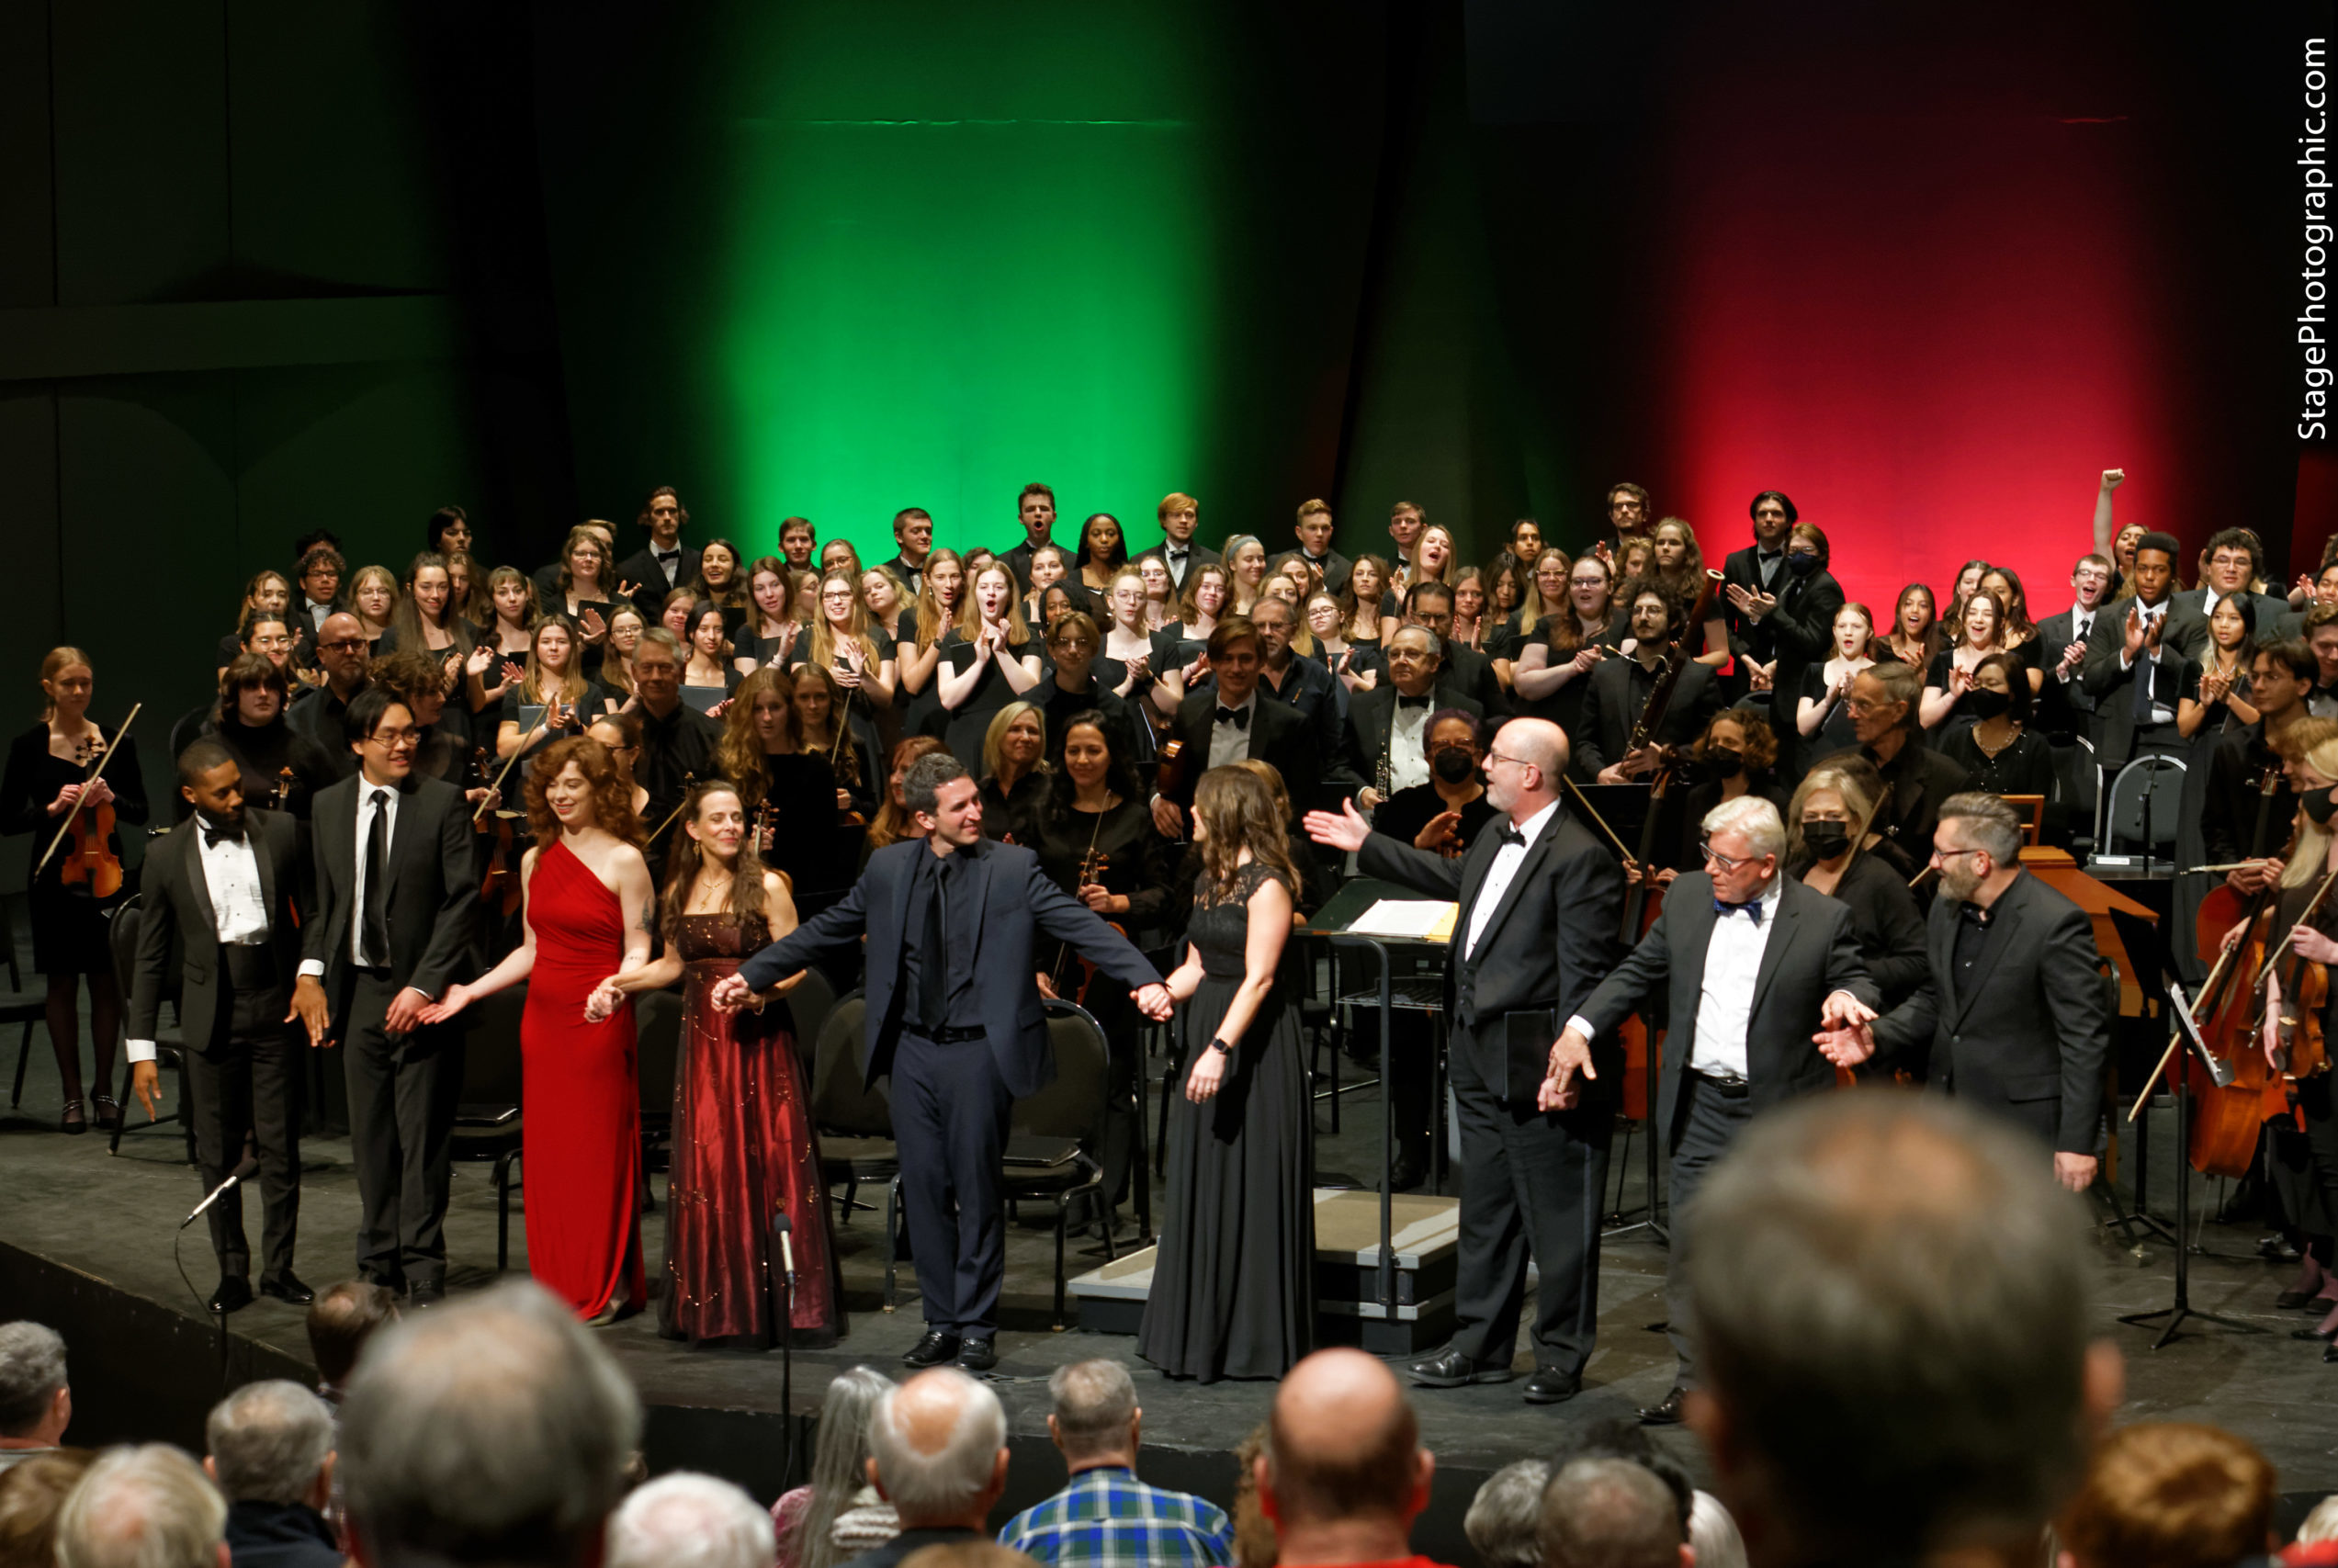 Performers, soloists and conductors take well-deserved bows